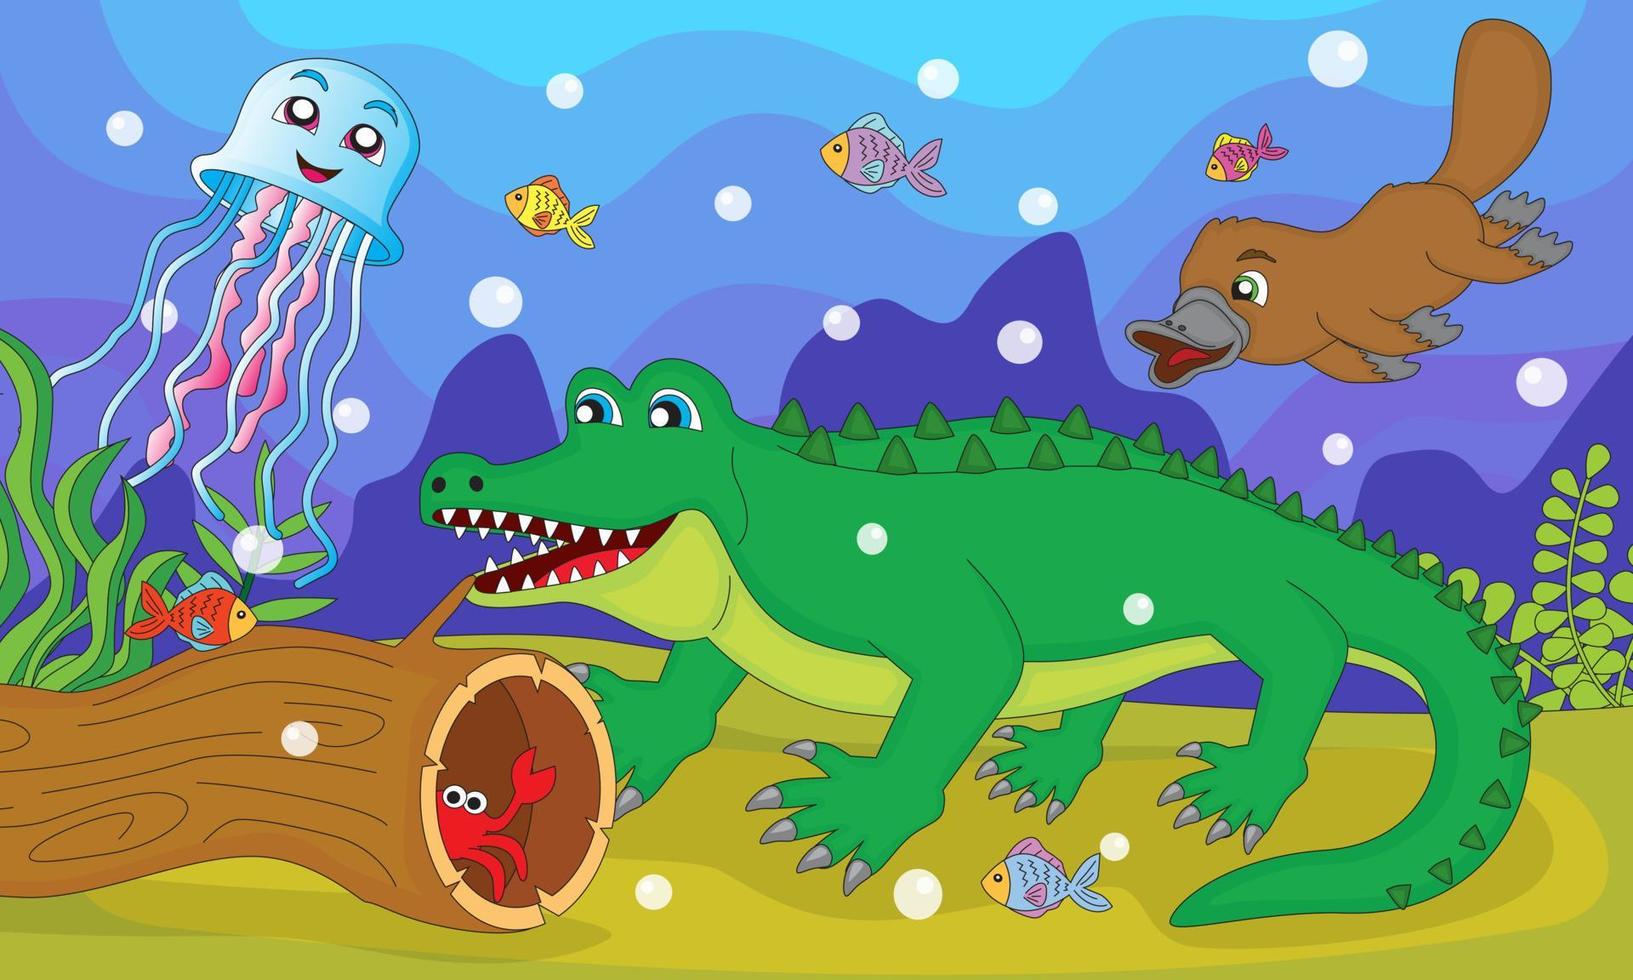 illustration of crocodiles, jellyfish and platypus with a background of life under the river, good for children's story books, education, posters, printing, websites and more vector